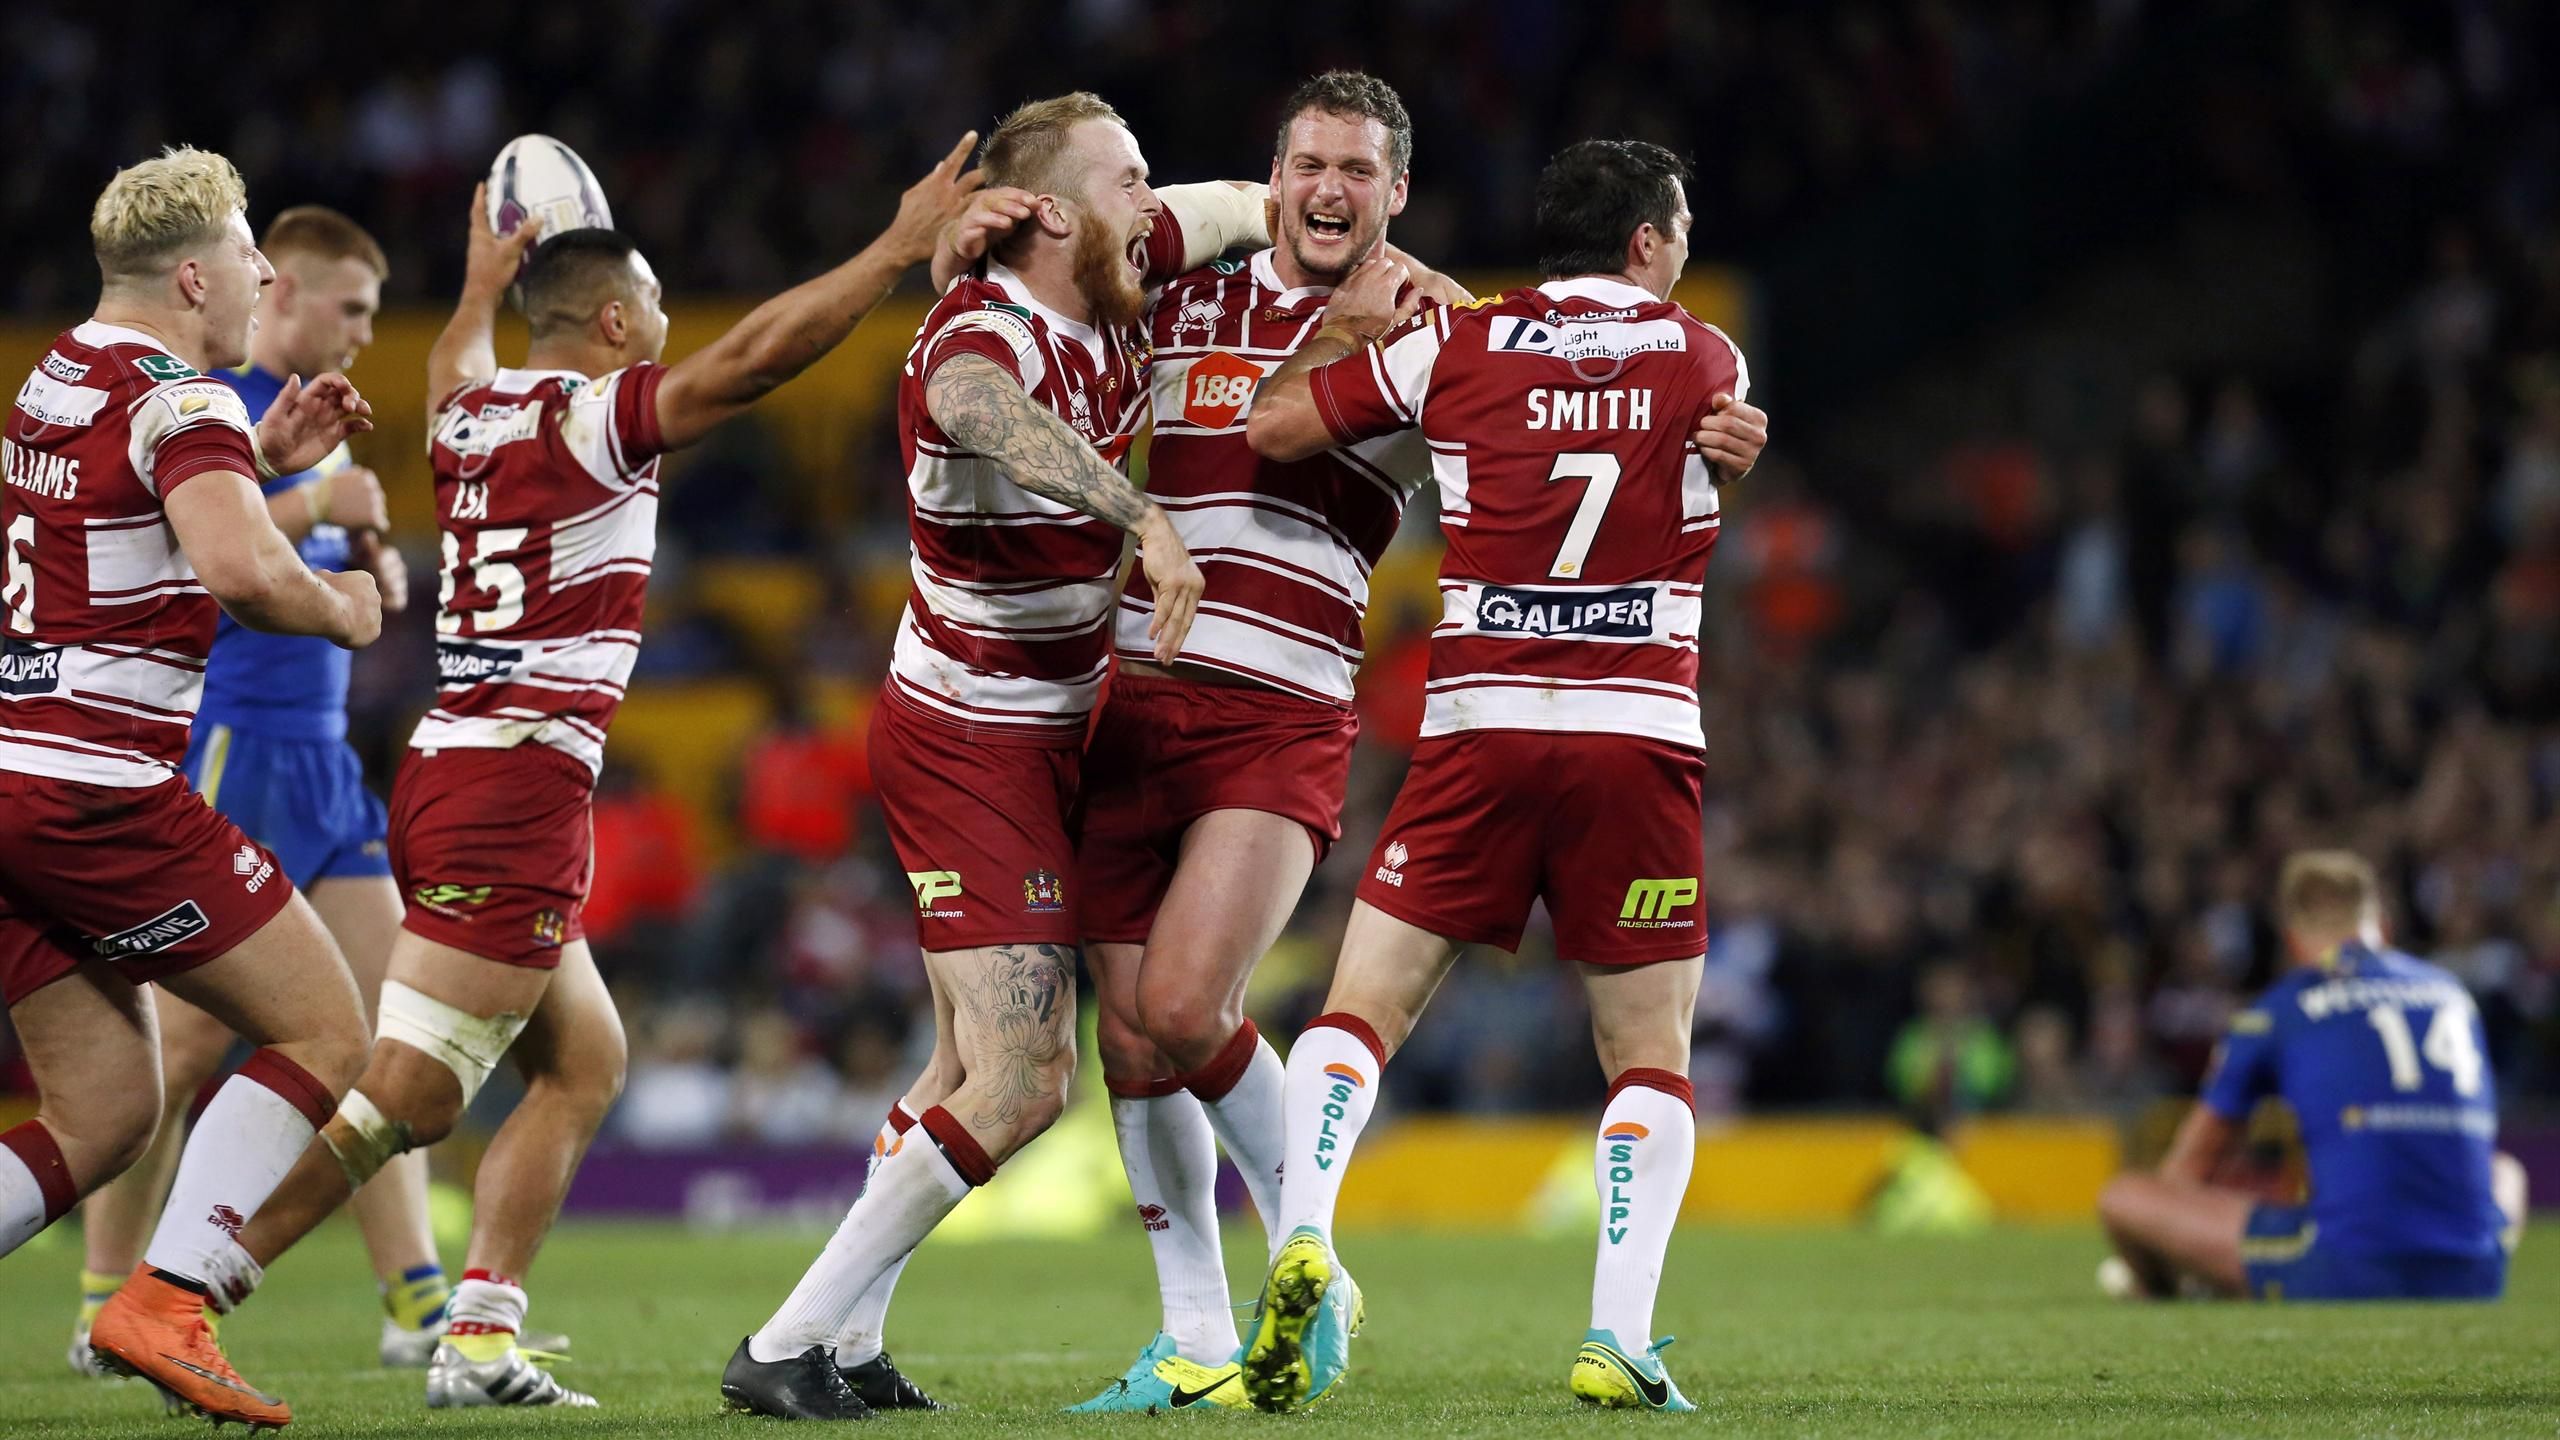 Wigan Warriors fight back to win grand final